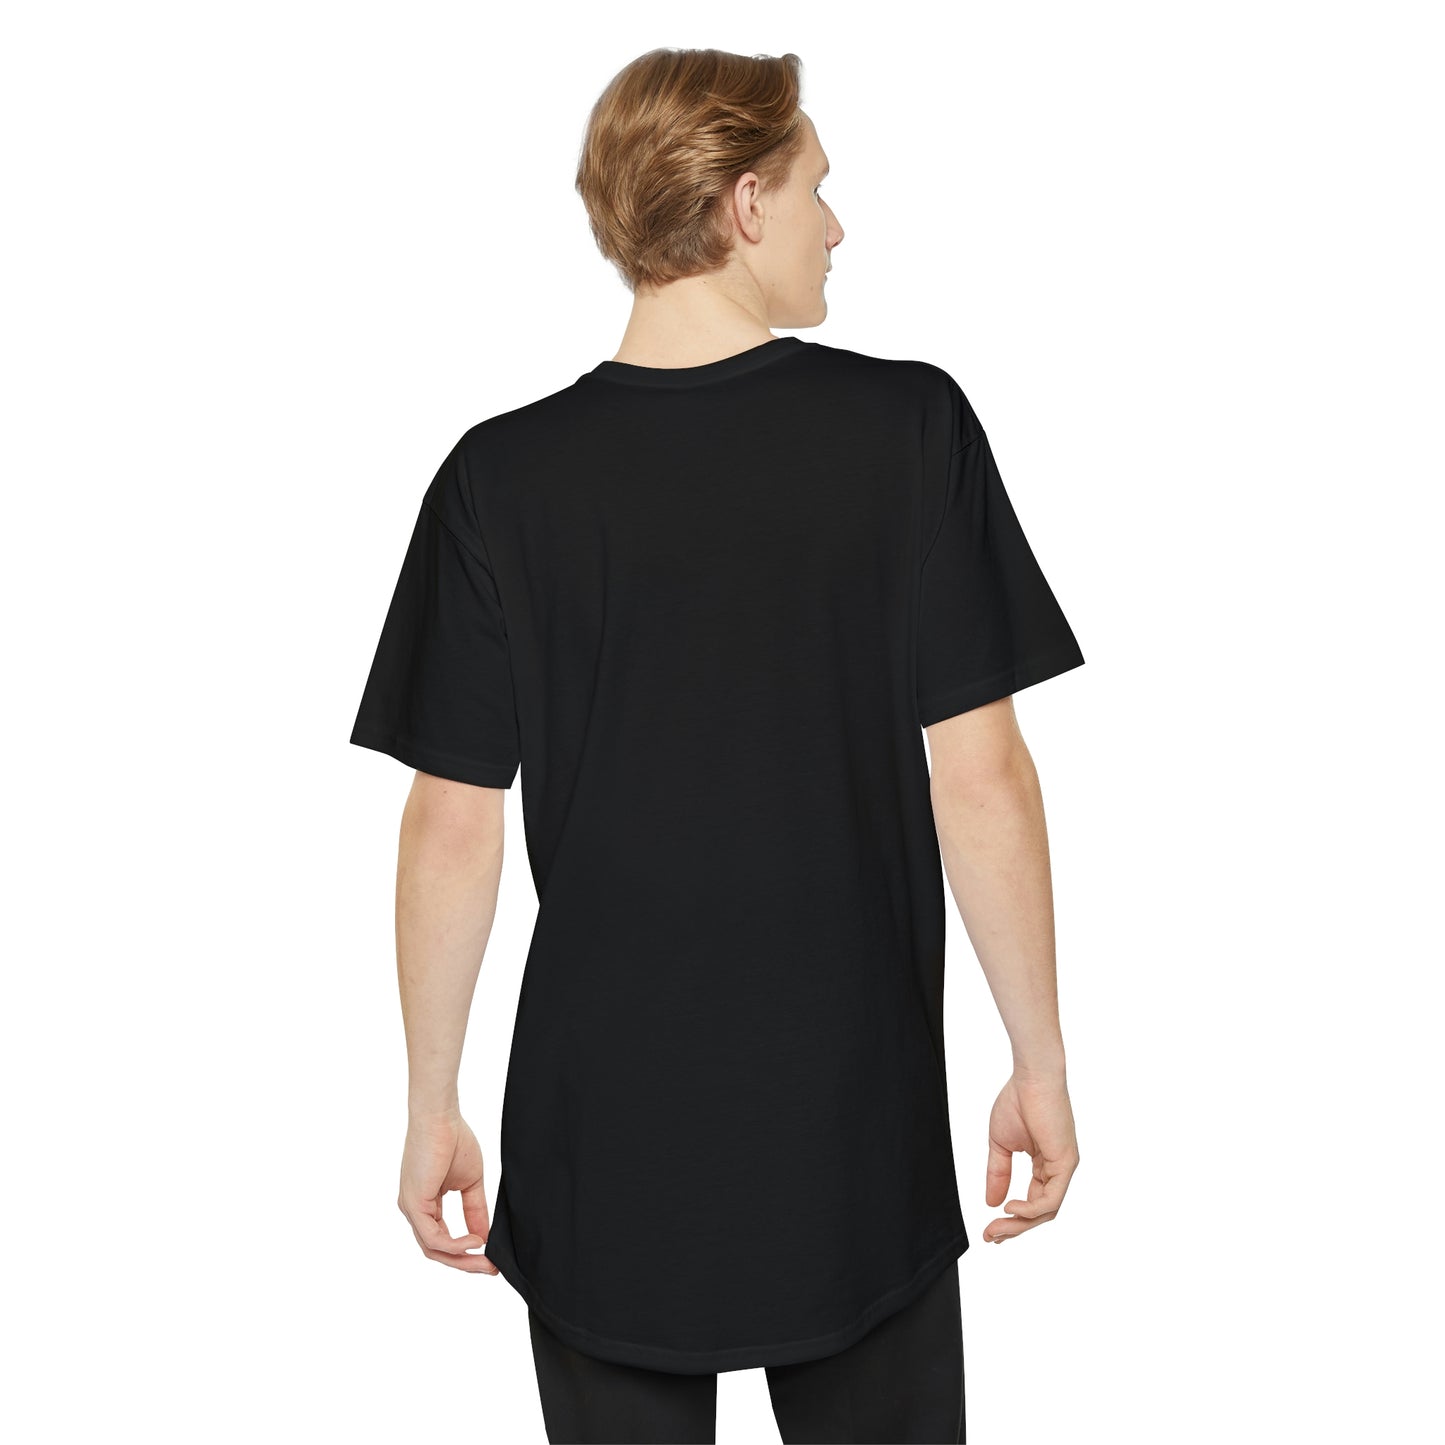 Mock up of the back view of standing man who is wearing the Black t-shirt